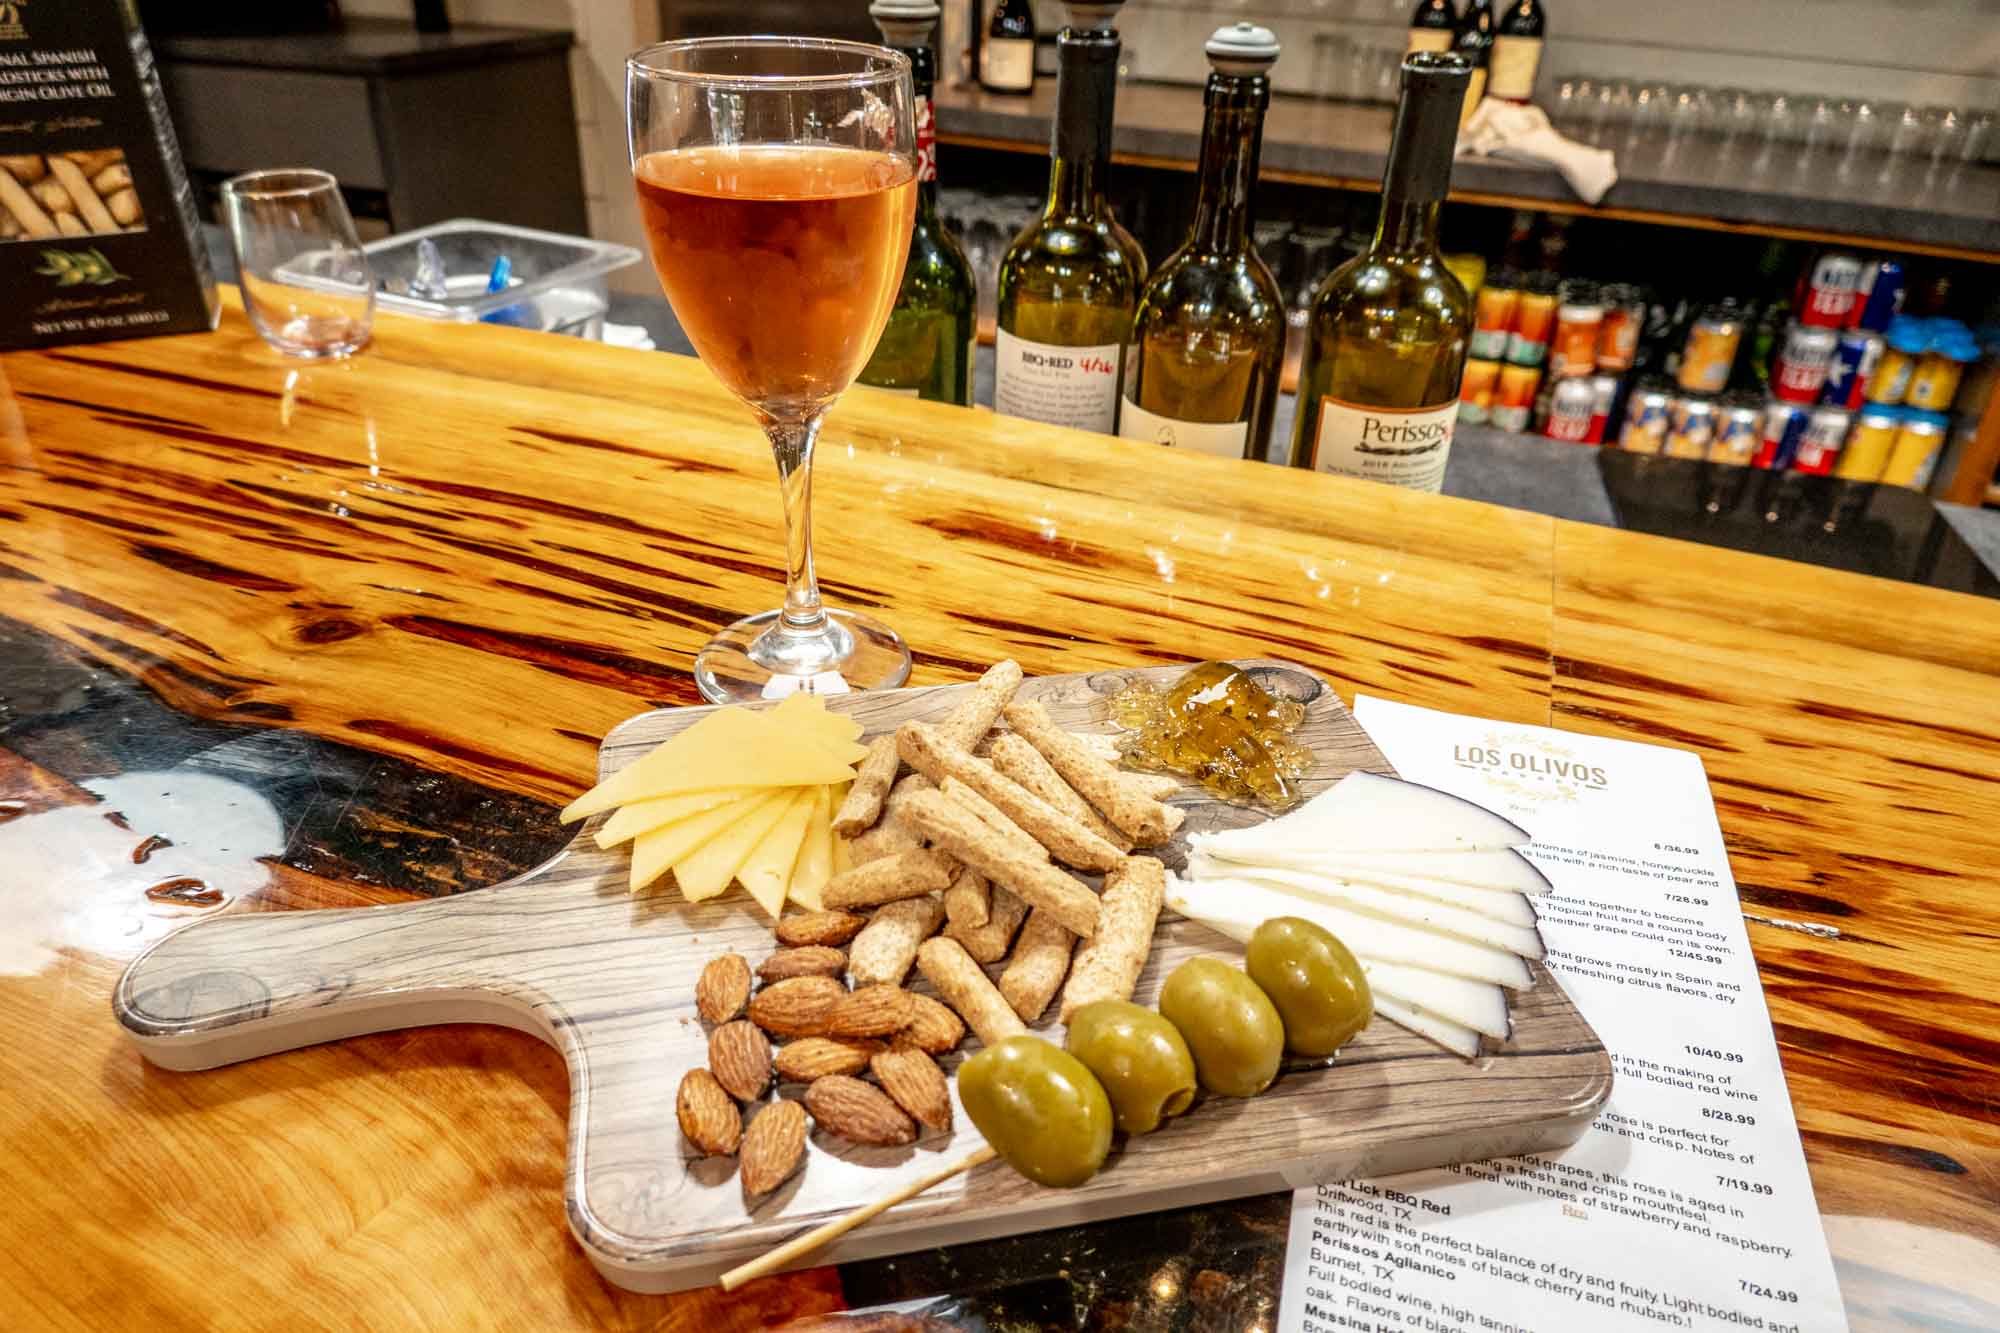 Cheese platter on a wooden board beside a glass of wine